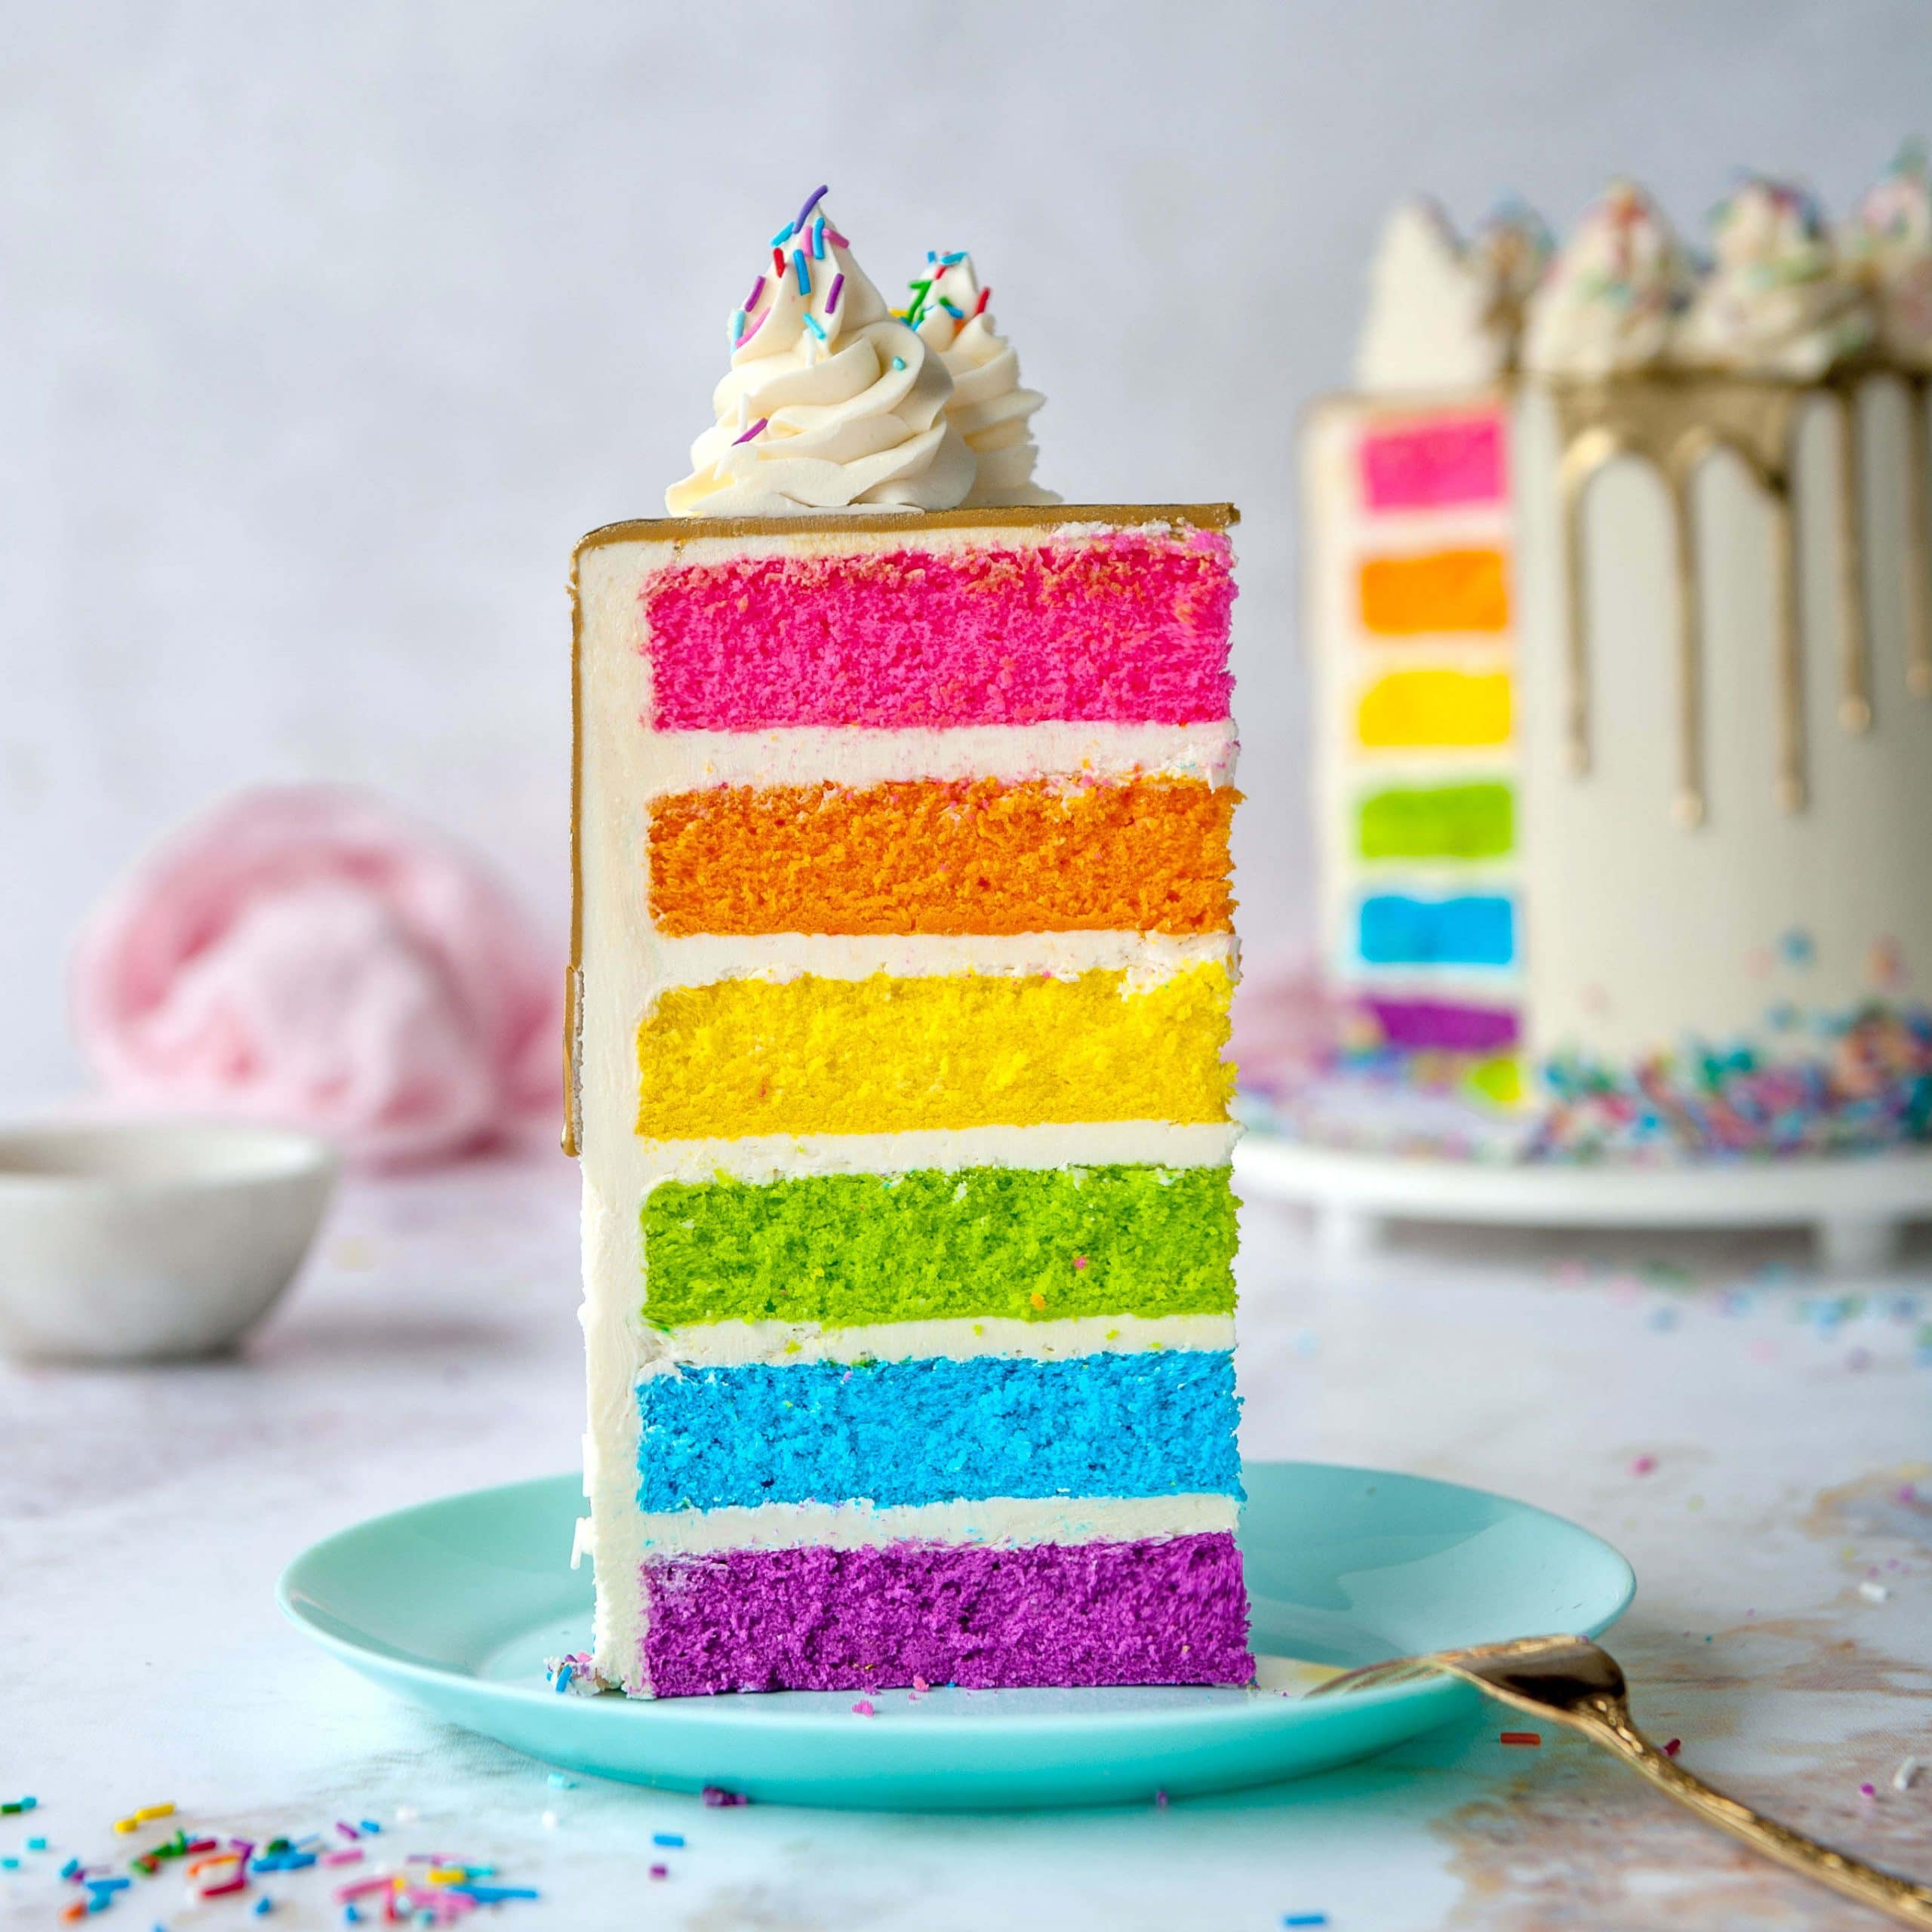 slice of rainbow cake on blue plate white background and whole cake in background